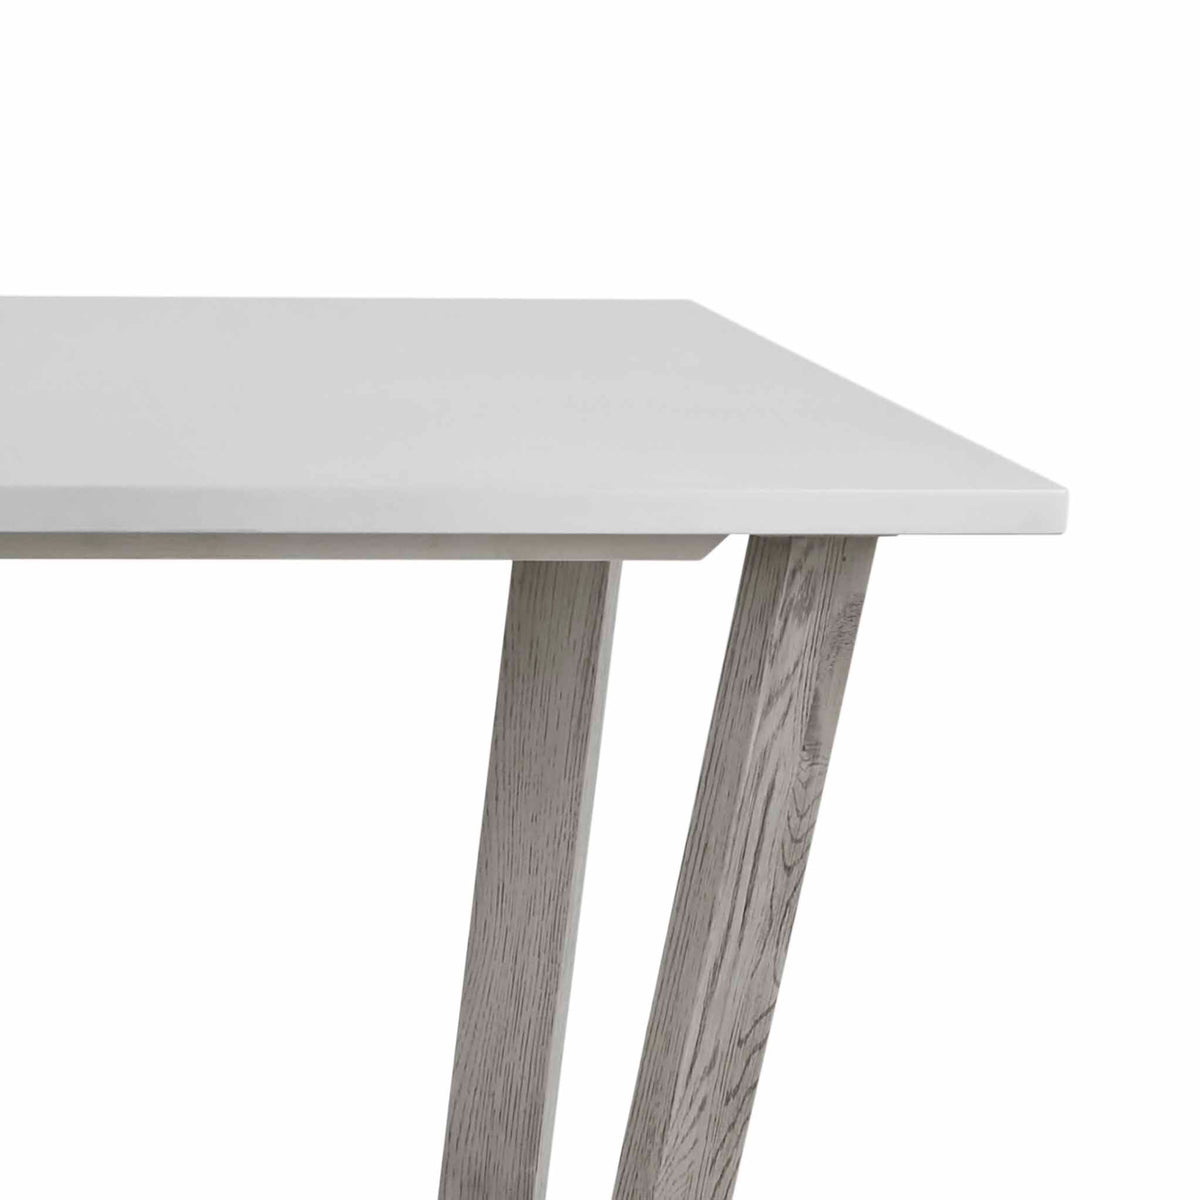 Epsom 150cm Rectangular Dining Table with concrete effect top